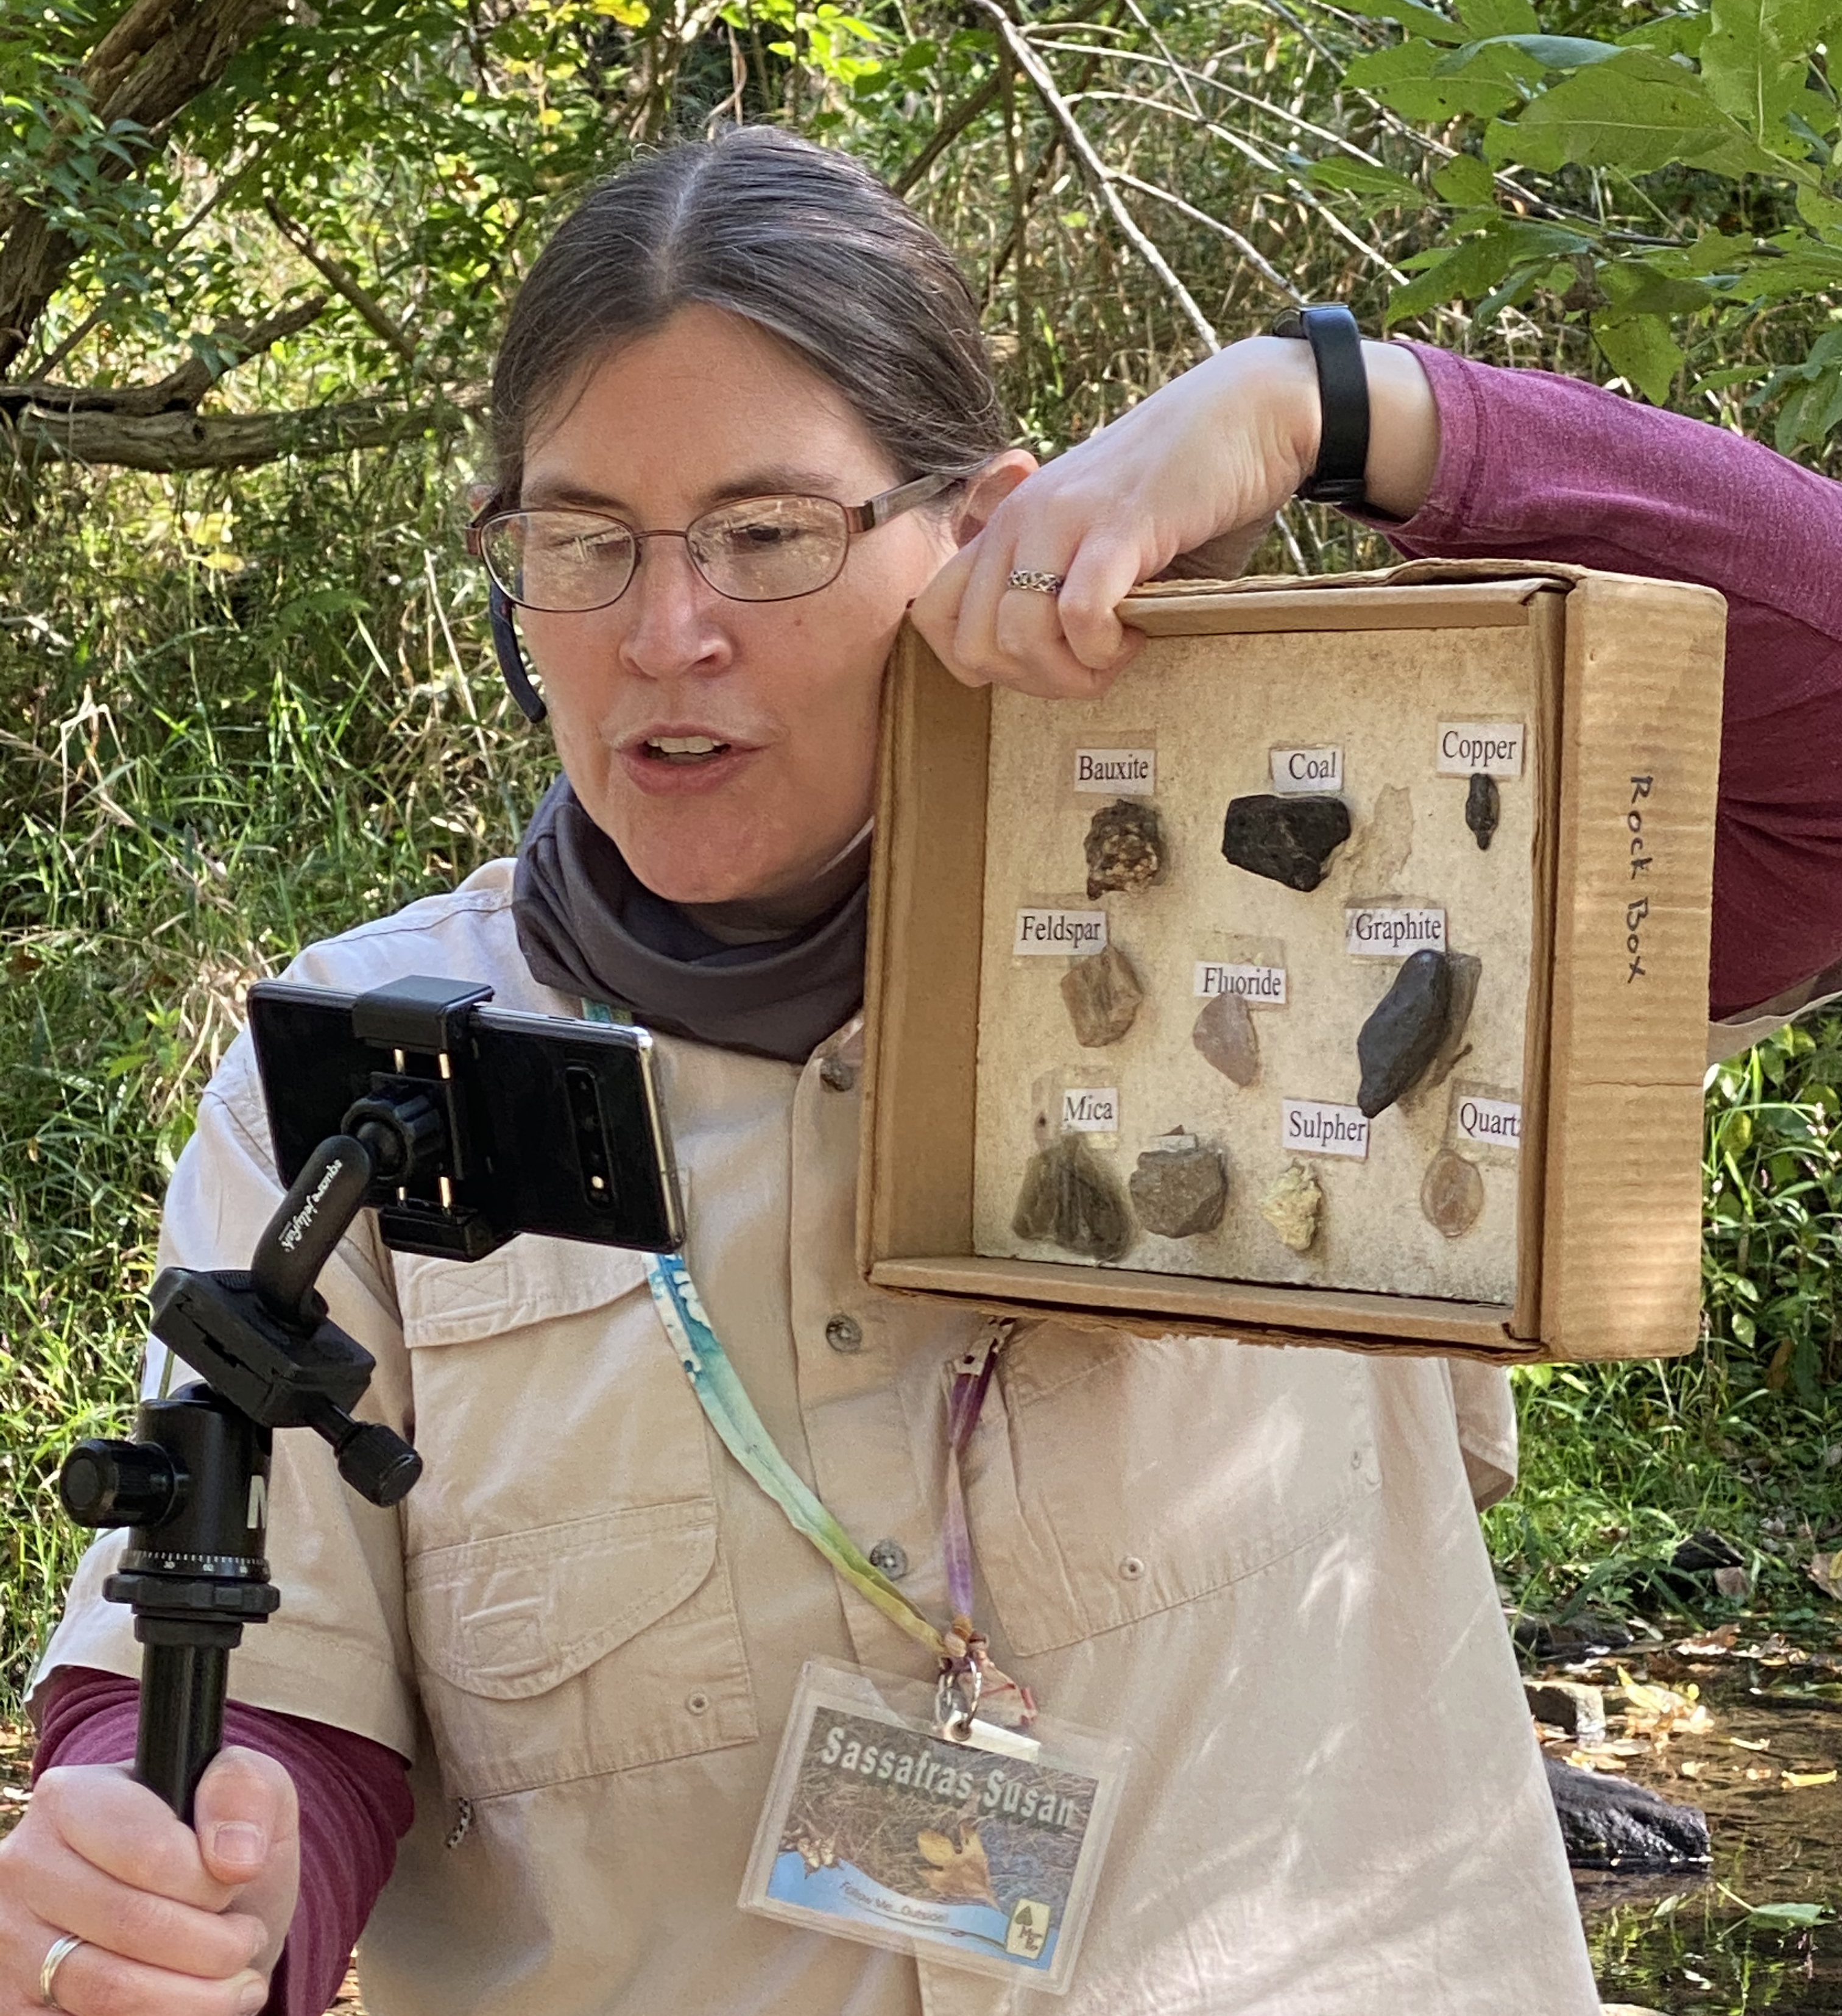 Naturalist showing a box of rocks